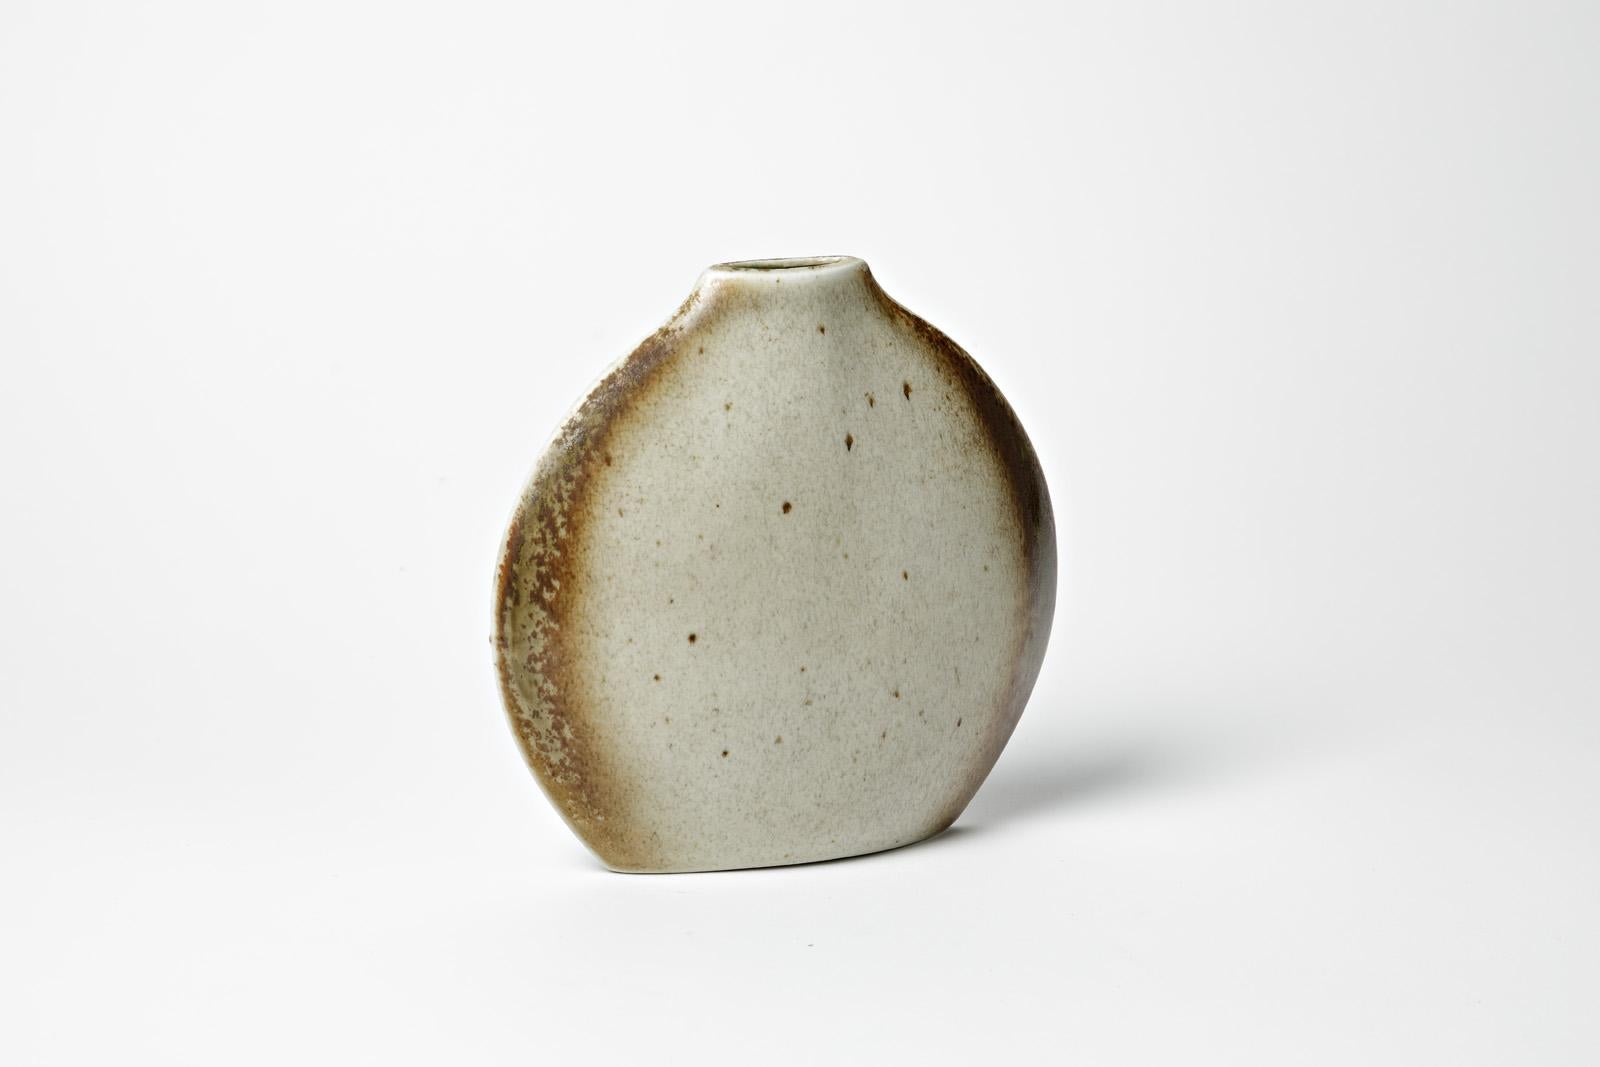 Mid-Century Modern White and Brown Circular Ceramic Vase by Montreau for Virebent 1970 Design For Sale